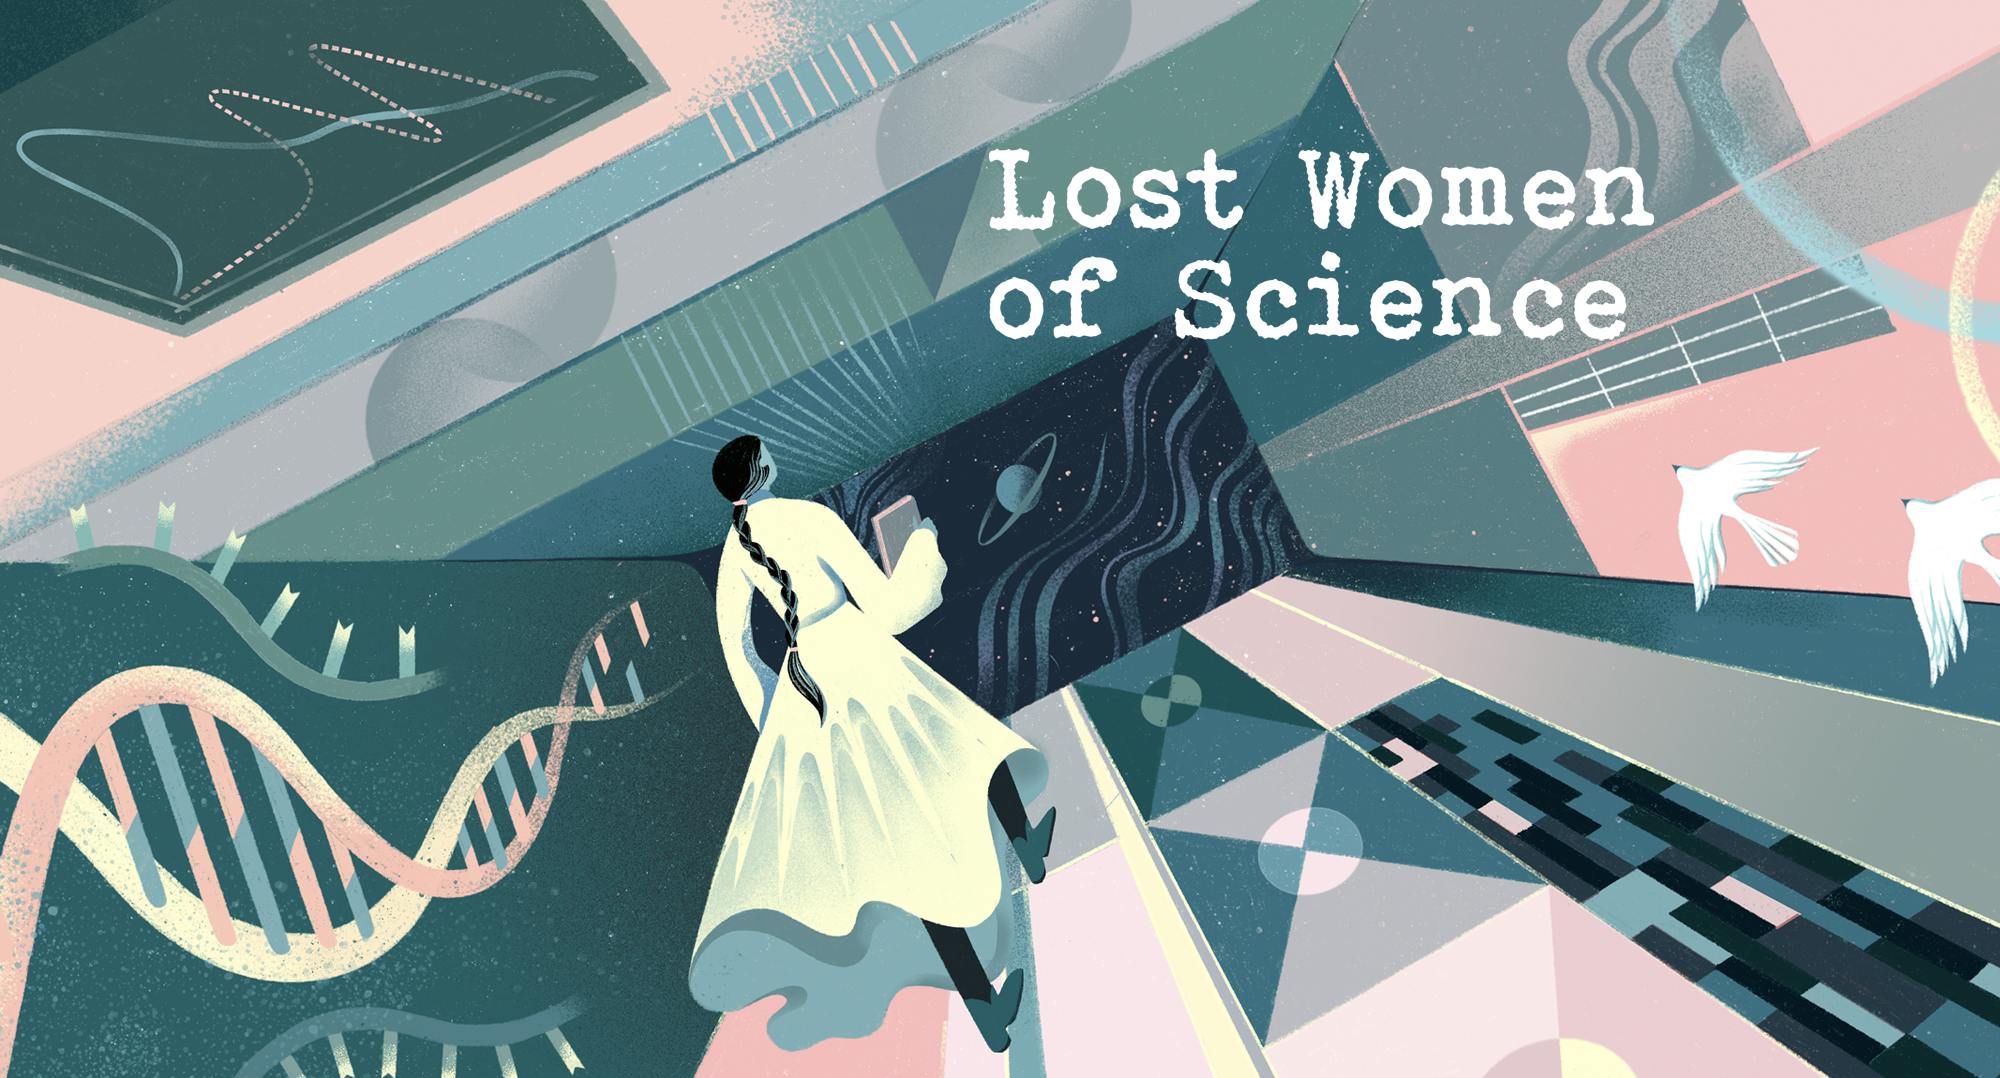 Listen to This New Podcast: The Lost Women of Science